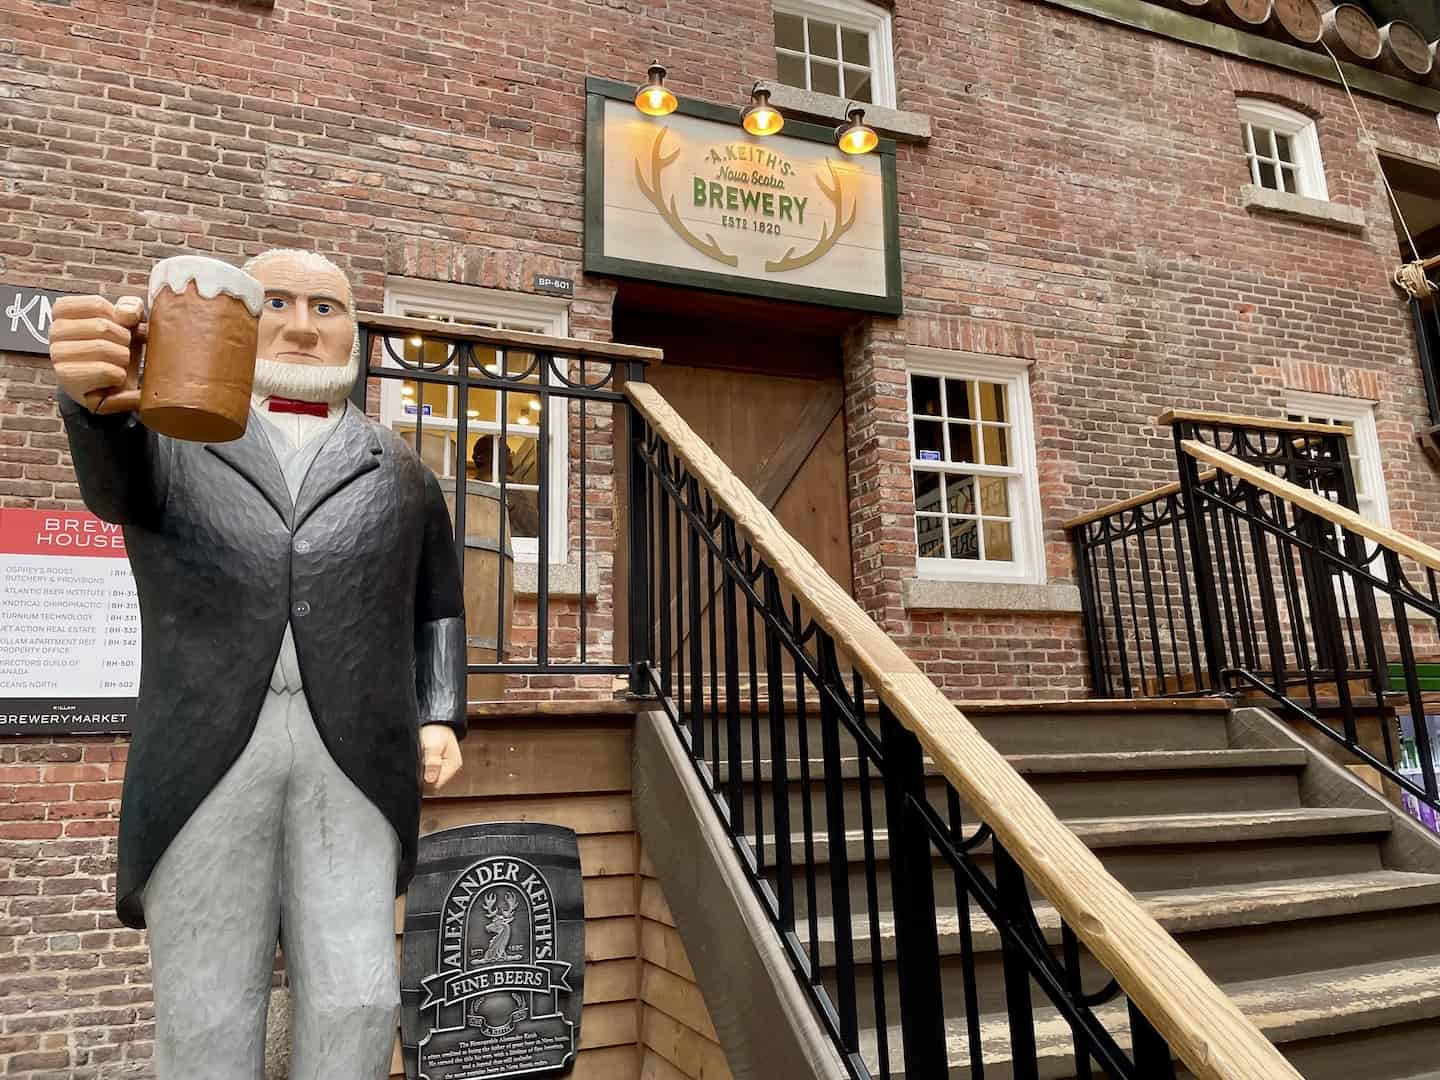 A wooden mannequin holding a mug of beer stands outside the Alexander Keith Brewery in Halifax.